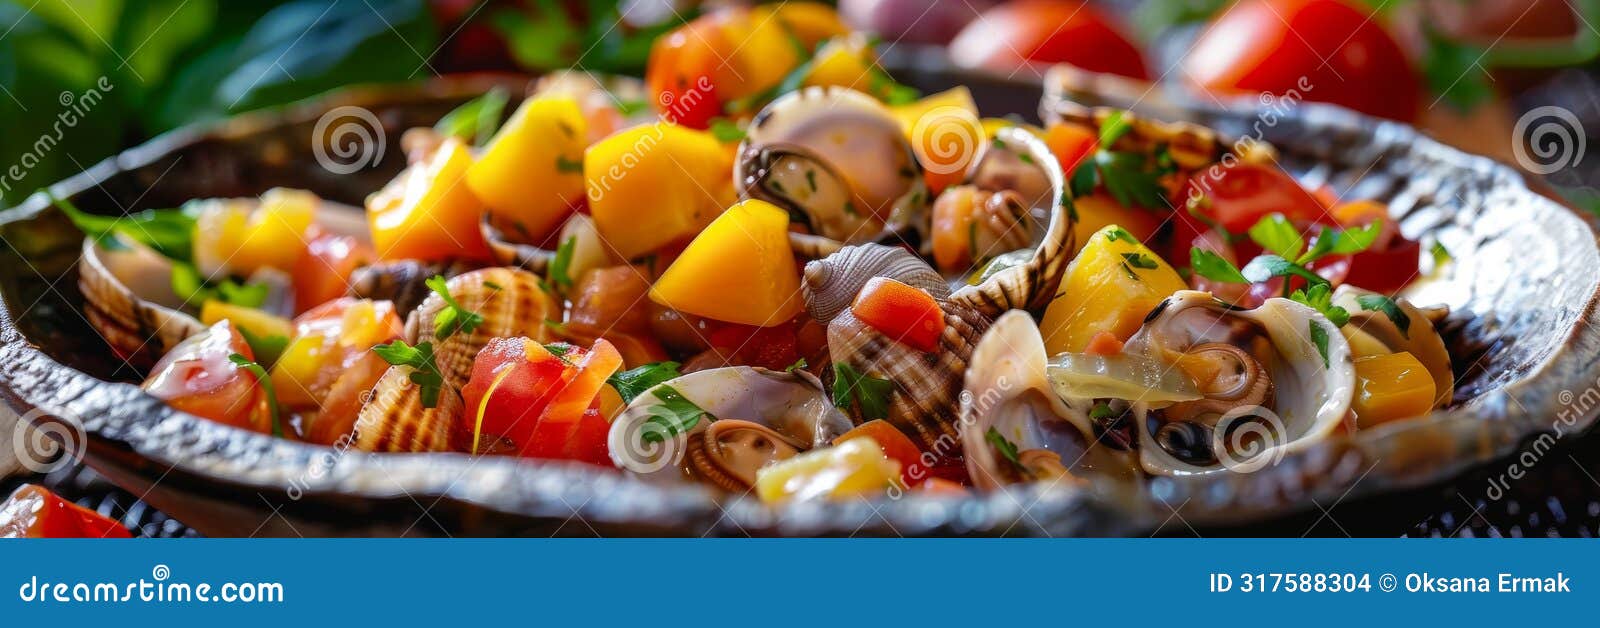 delicacy seafood dish with cooked seashells, bivalves or mytilus, tomatoes and mangoes salsa